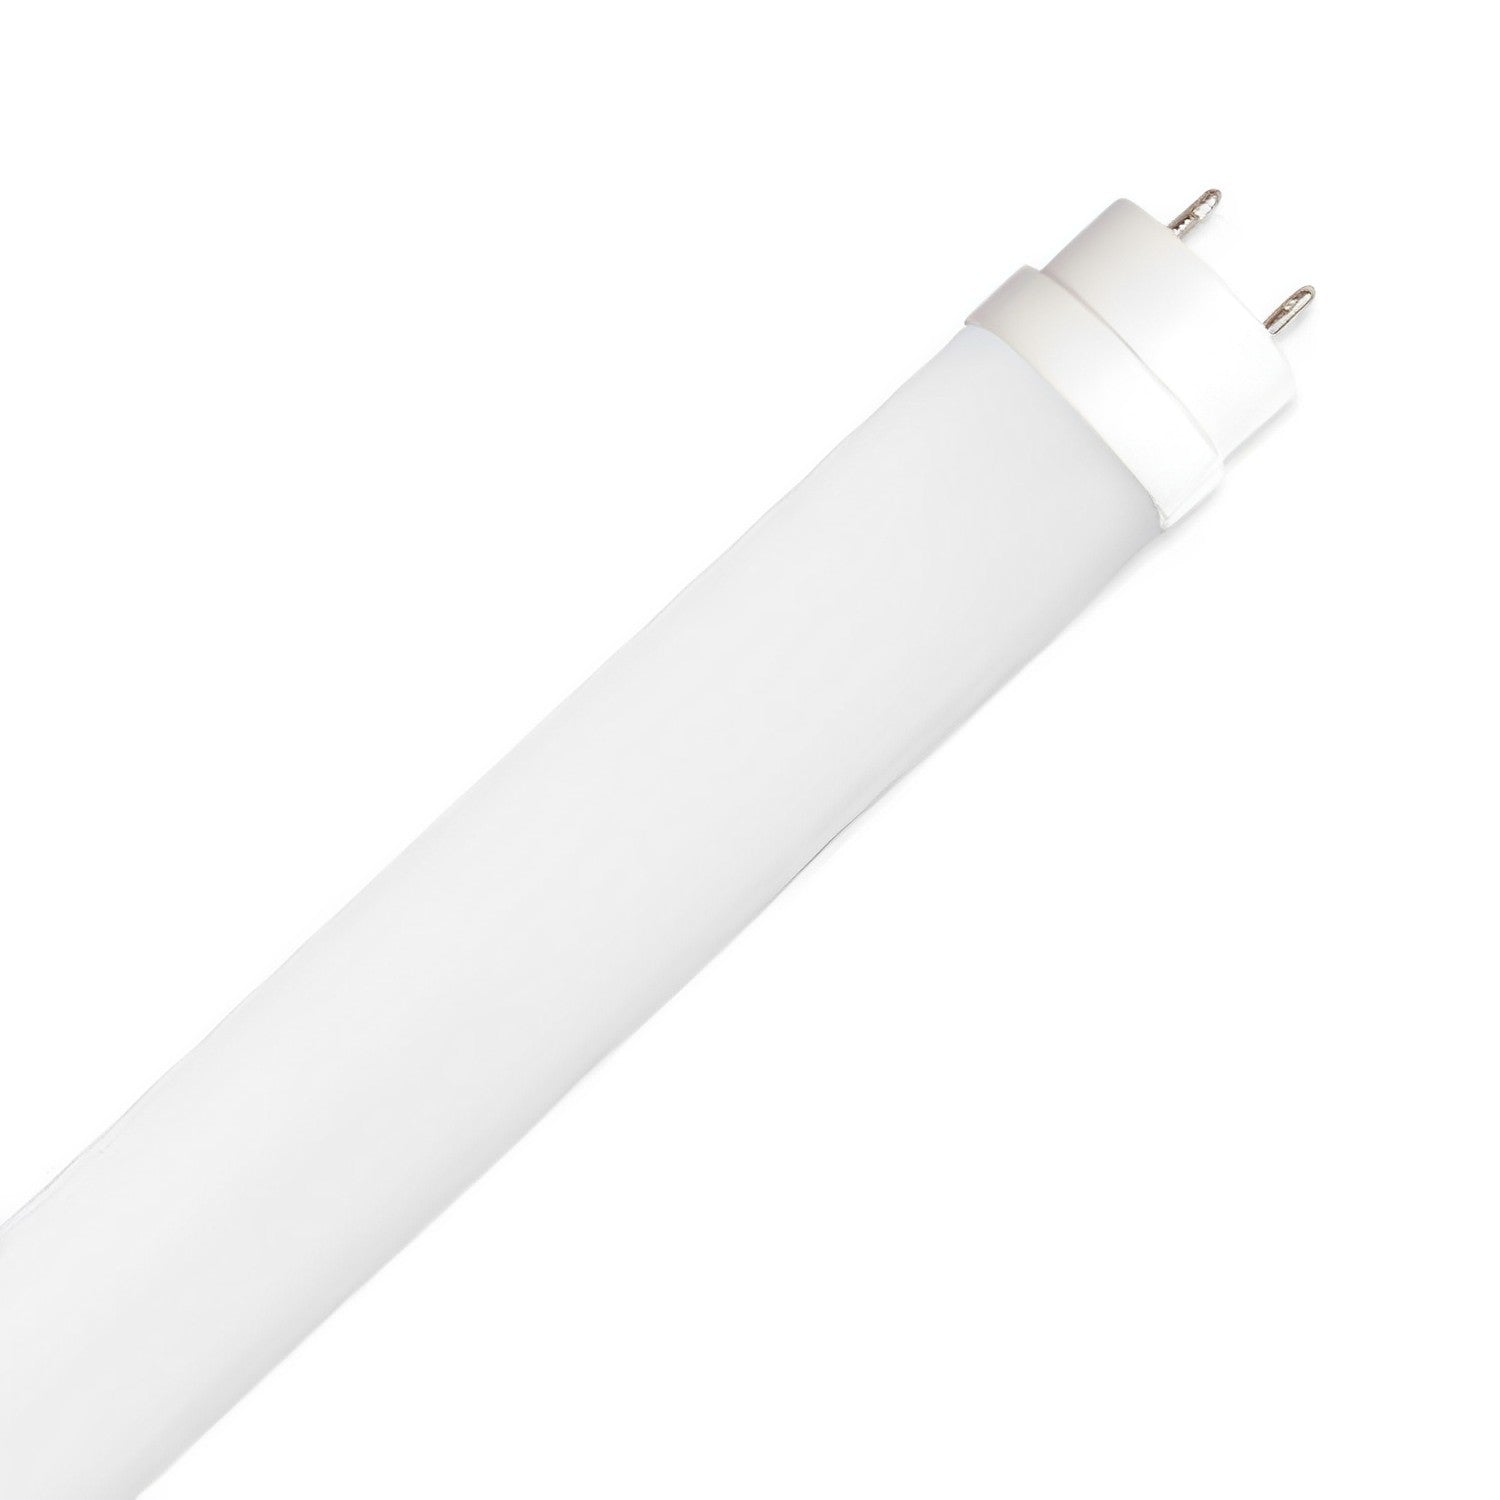 T8 LED Tube, 4ft, Frosted, Plug & Play, Hybrid Type A+B, 15W, 2200 Lumens